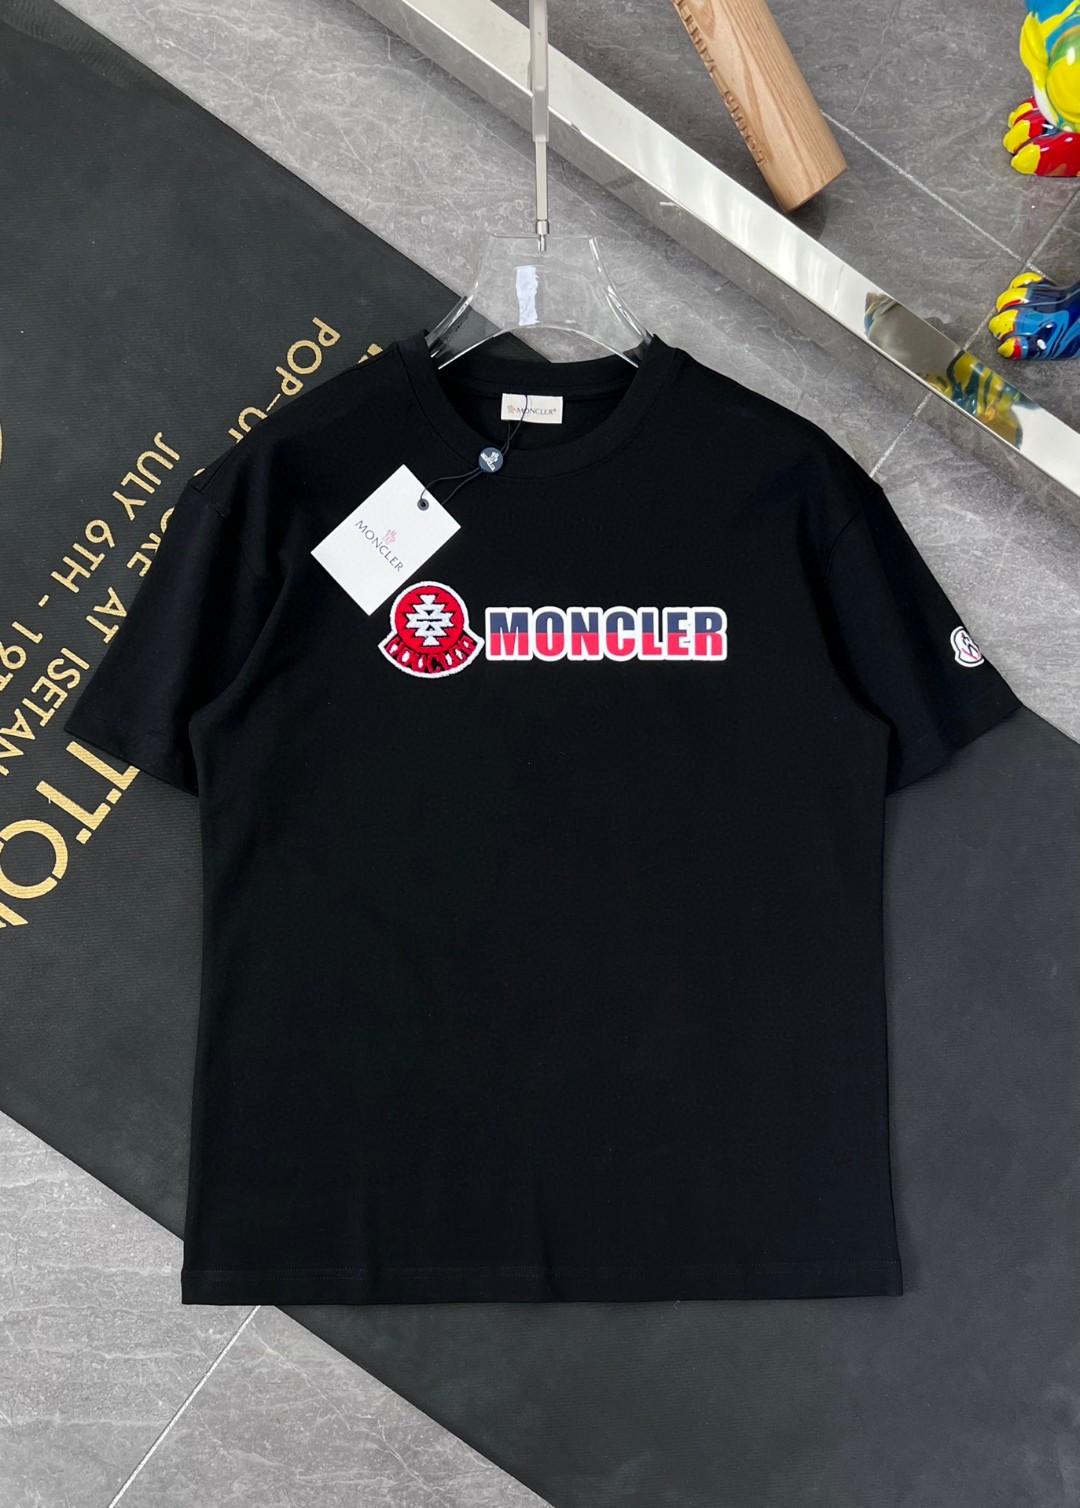 Moncler Clothing T-Shirt Black White Unisex Cotton Spring/Summer Collection Fashion Long Sleeve